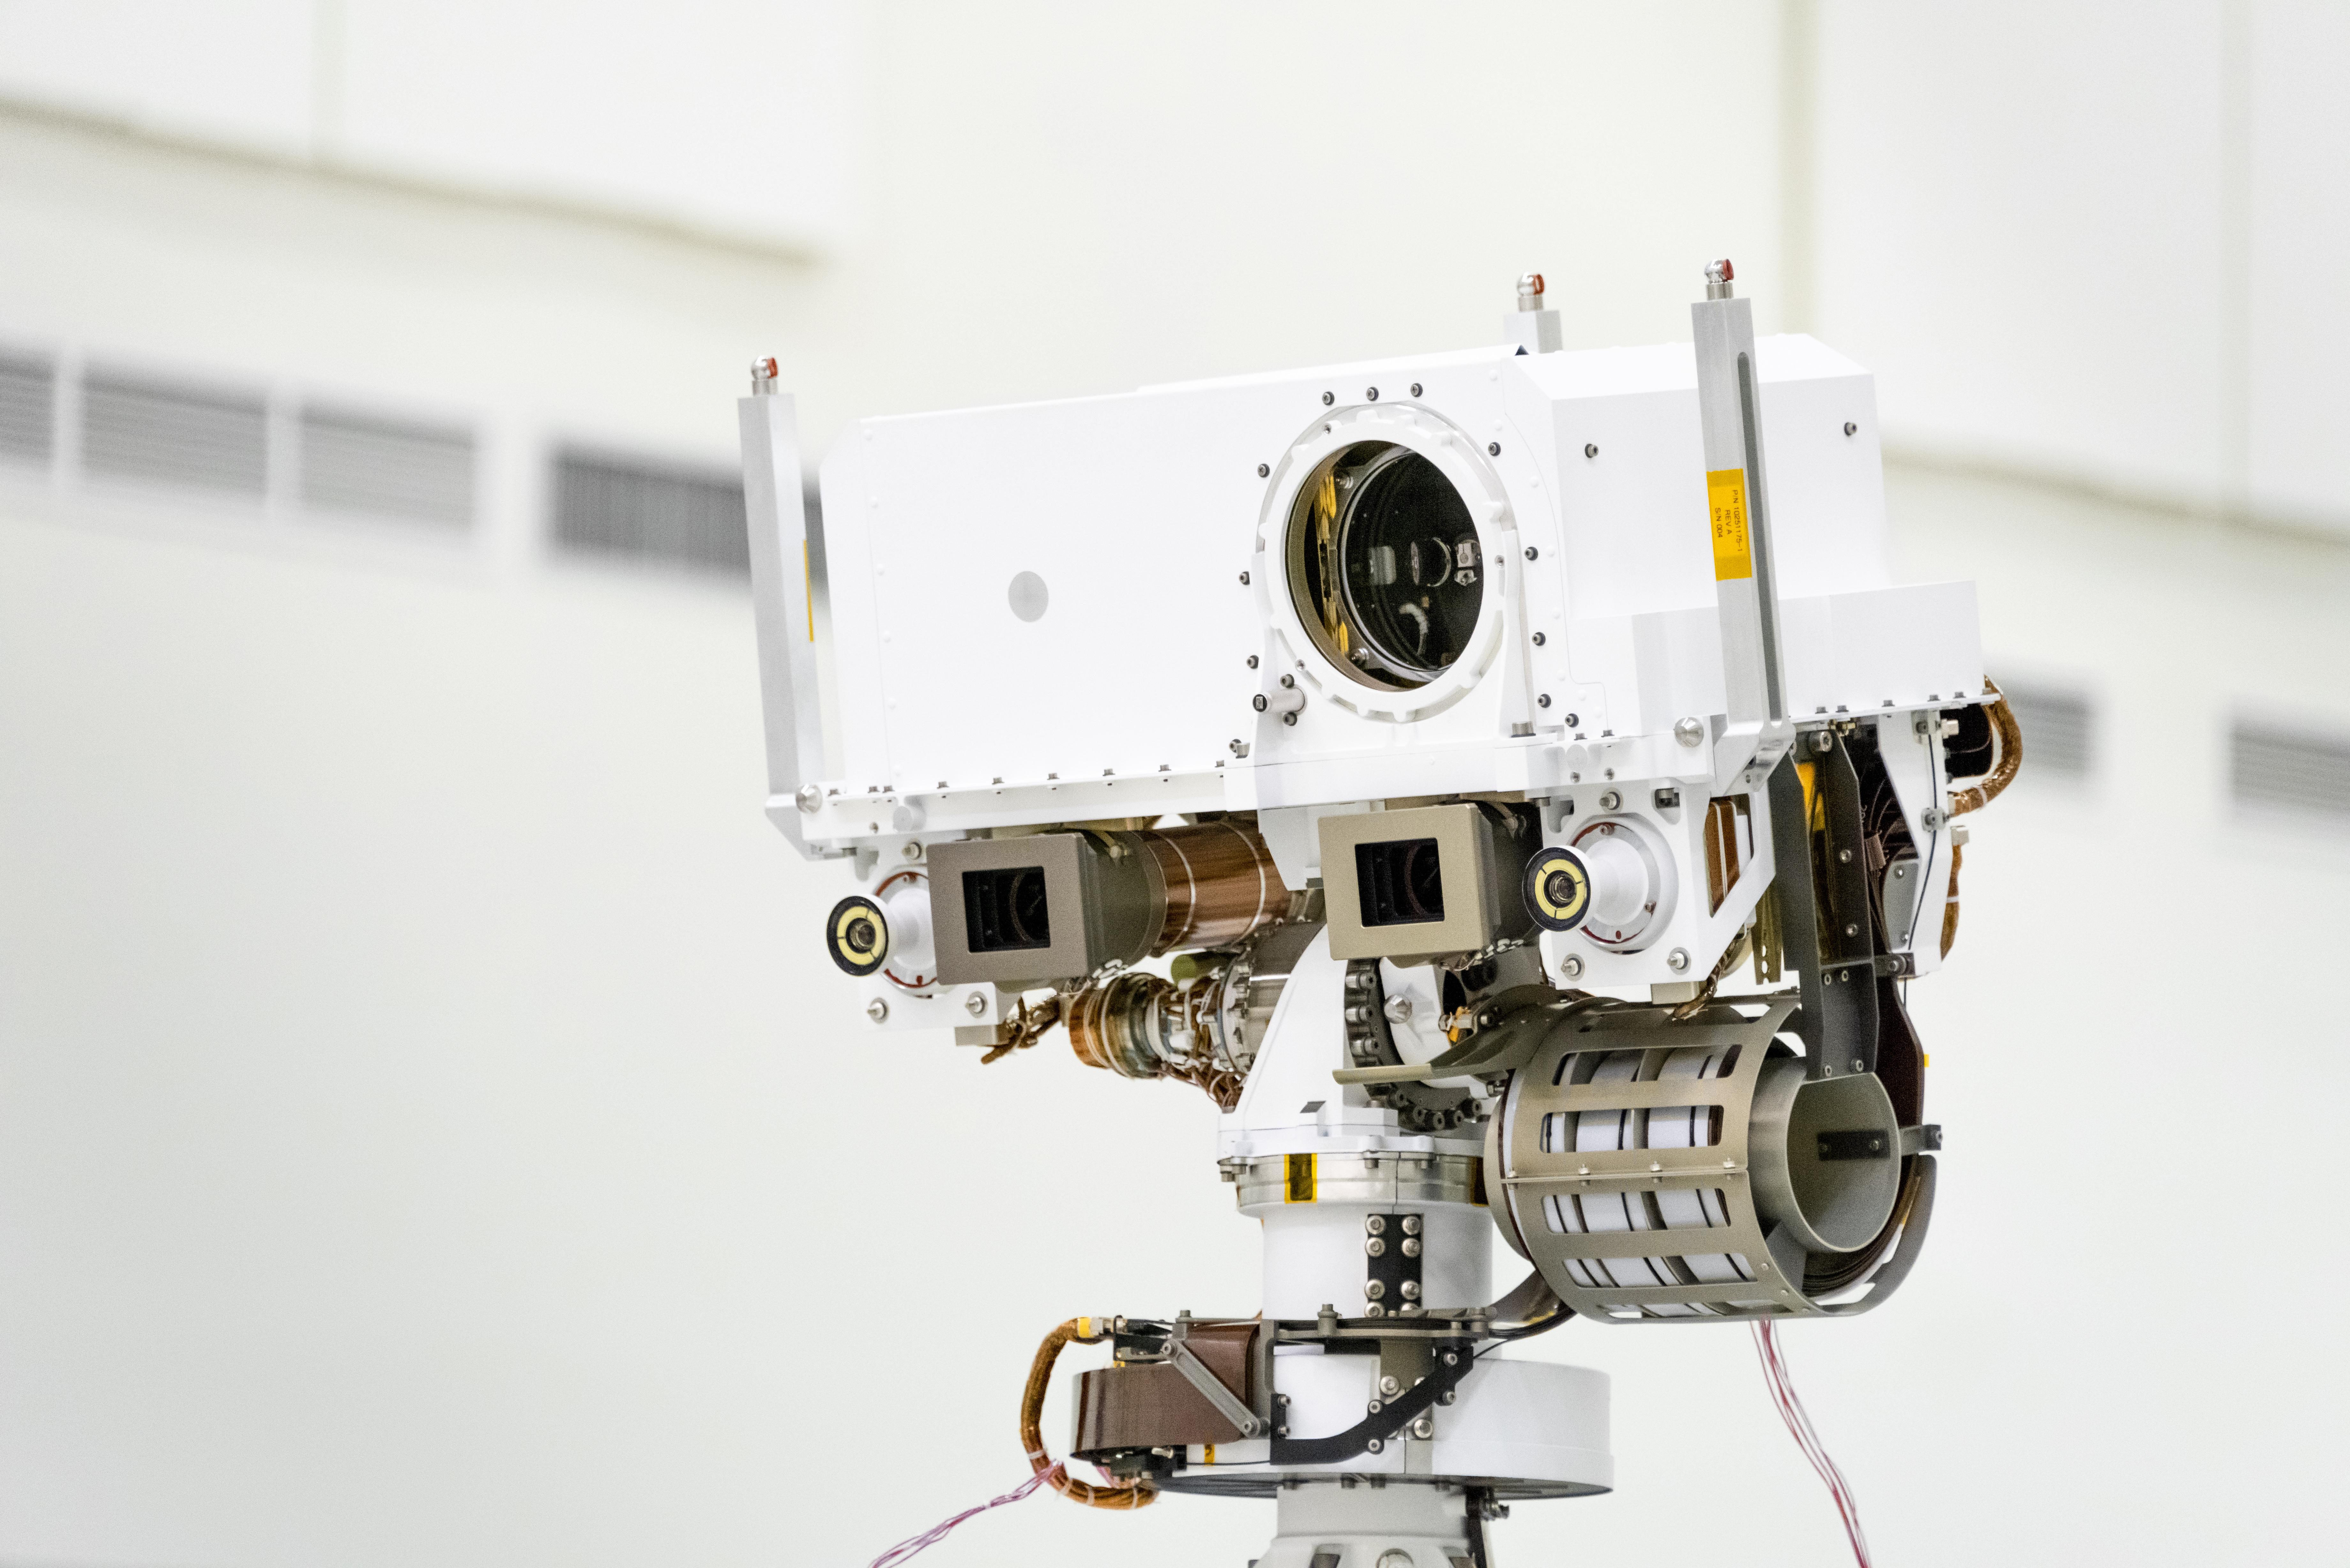 This image shows a close-up of the head of Mars 2020s remote sensing mast. The mast head contains the SuperCam instrument.